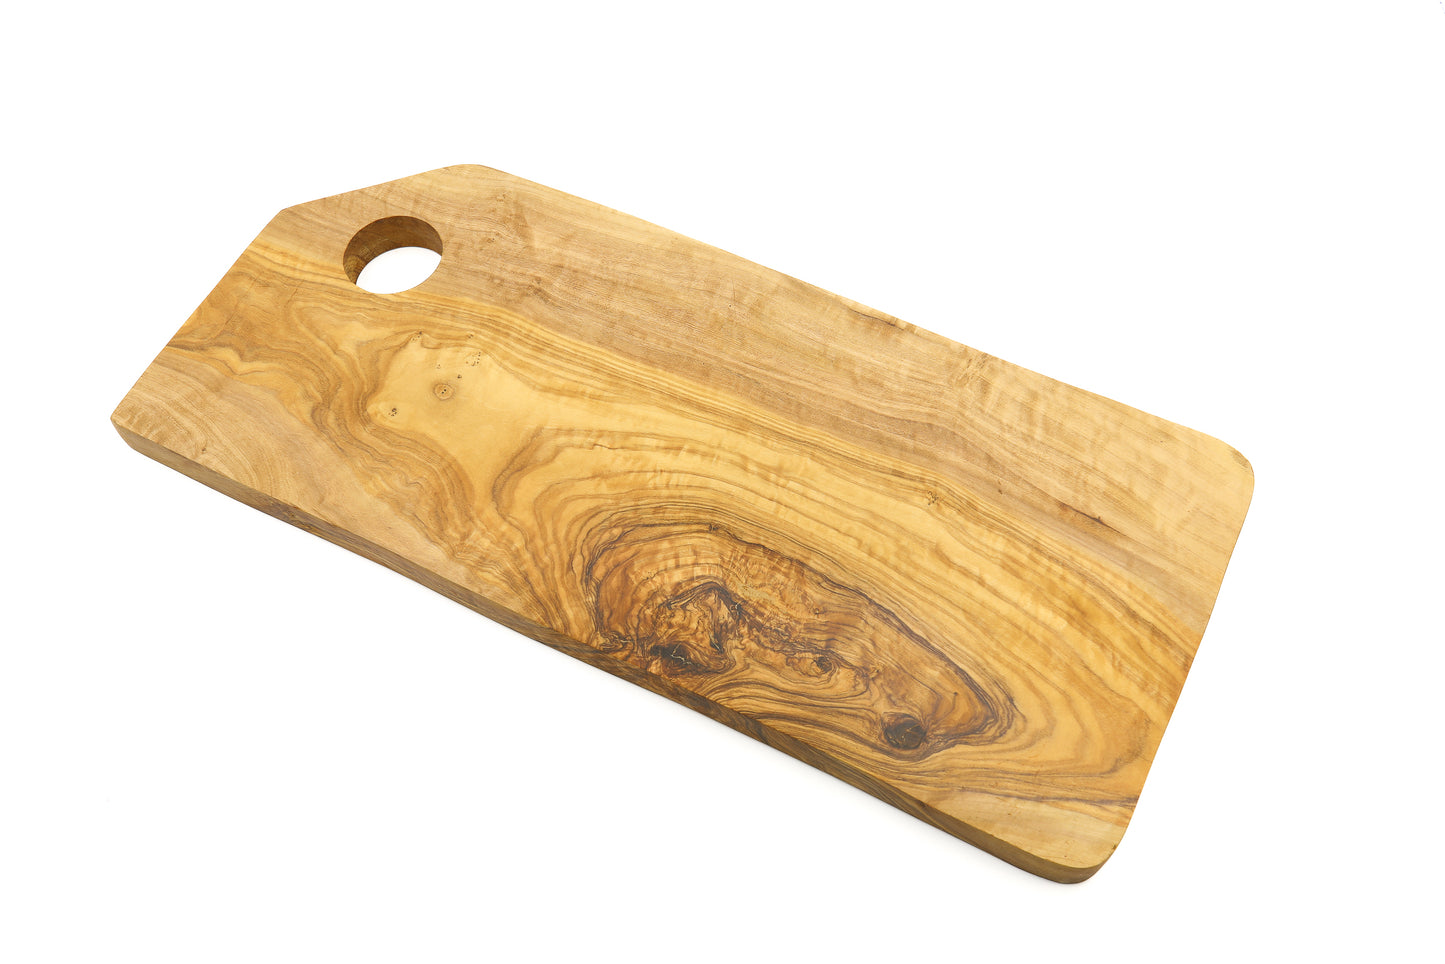 Olive wood chopping board with a rectangular, beveled design